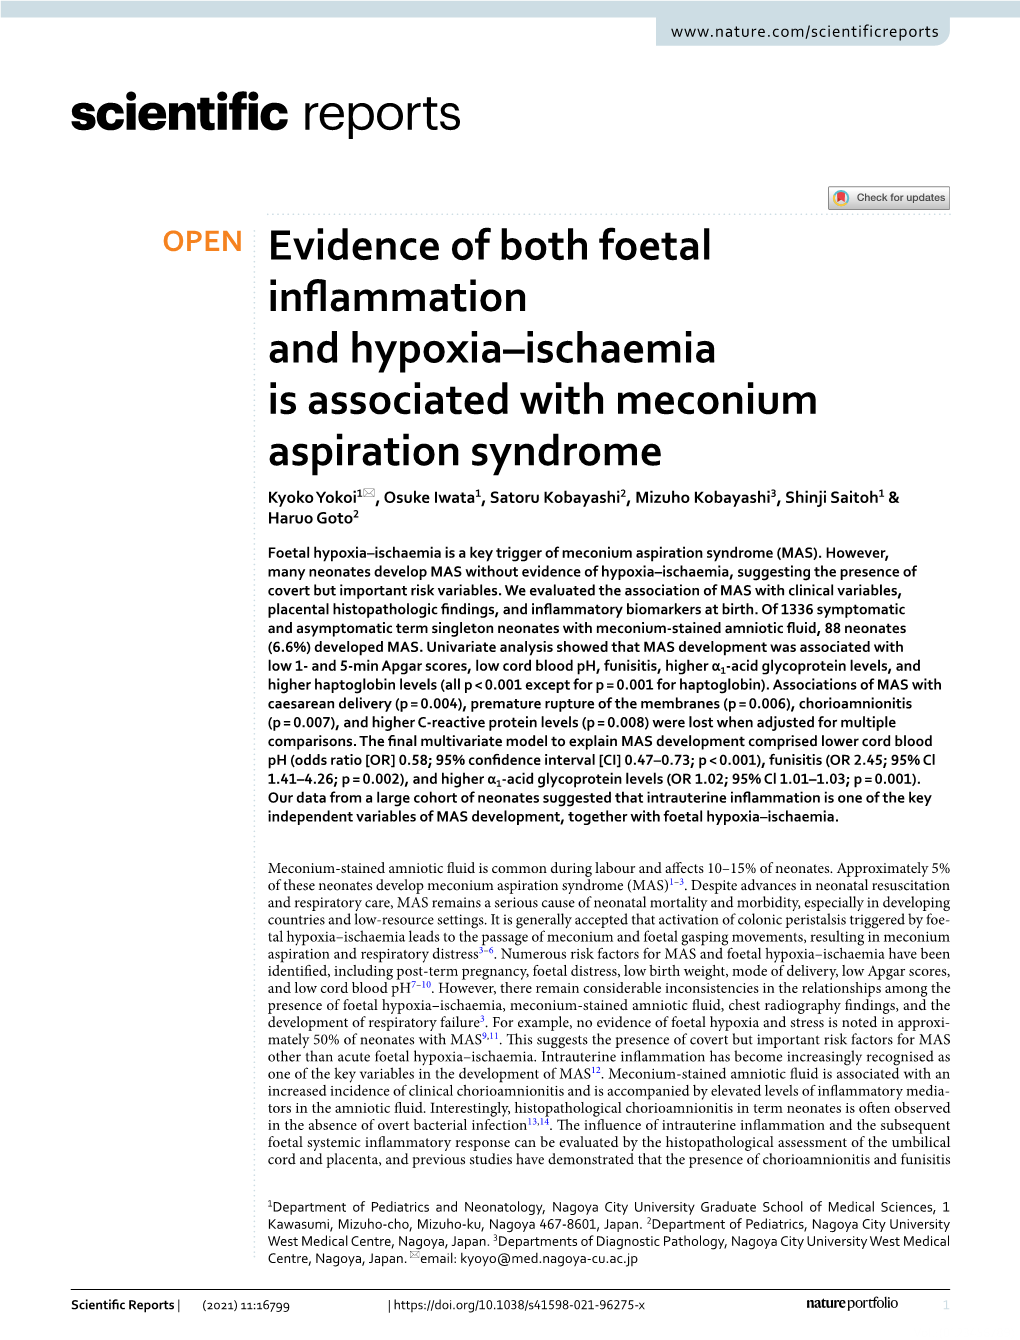 Evidence of Both Foetal Inflammation and Hypoxia–Ischaemia Is Associated with Meconium Aspiration Syndrome